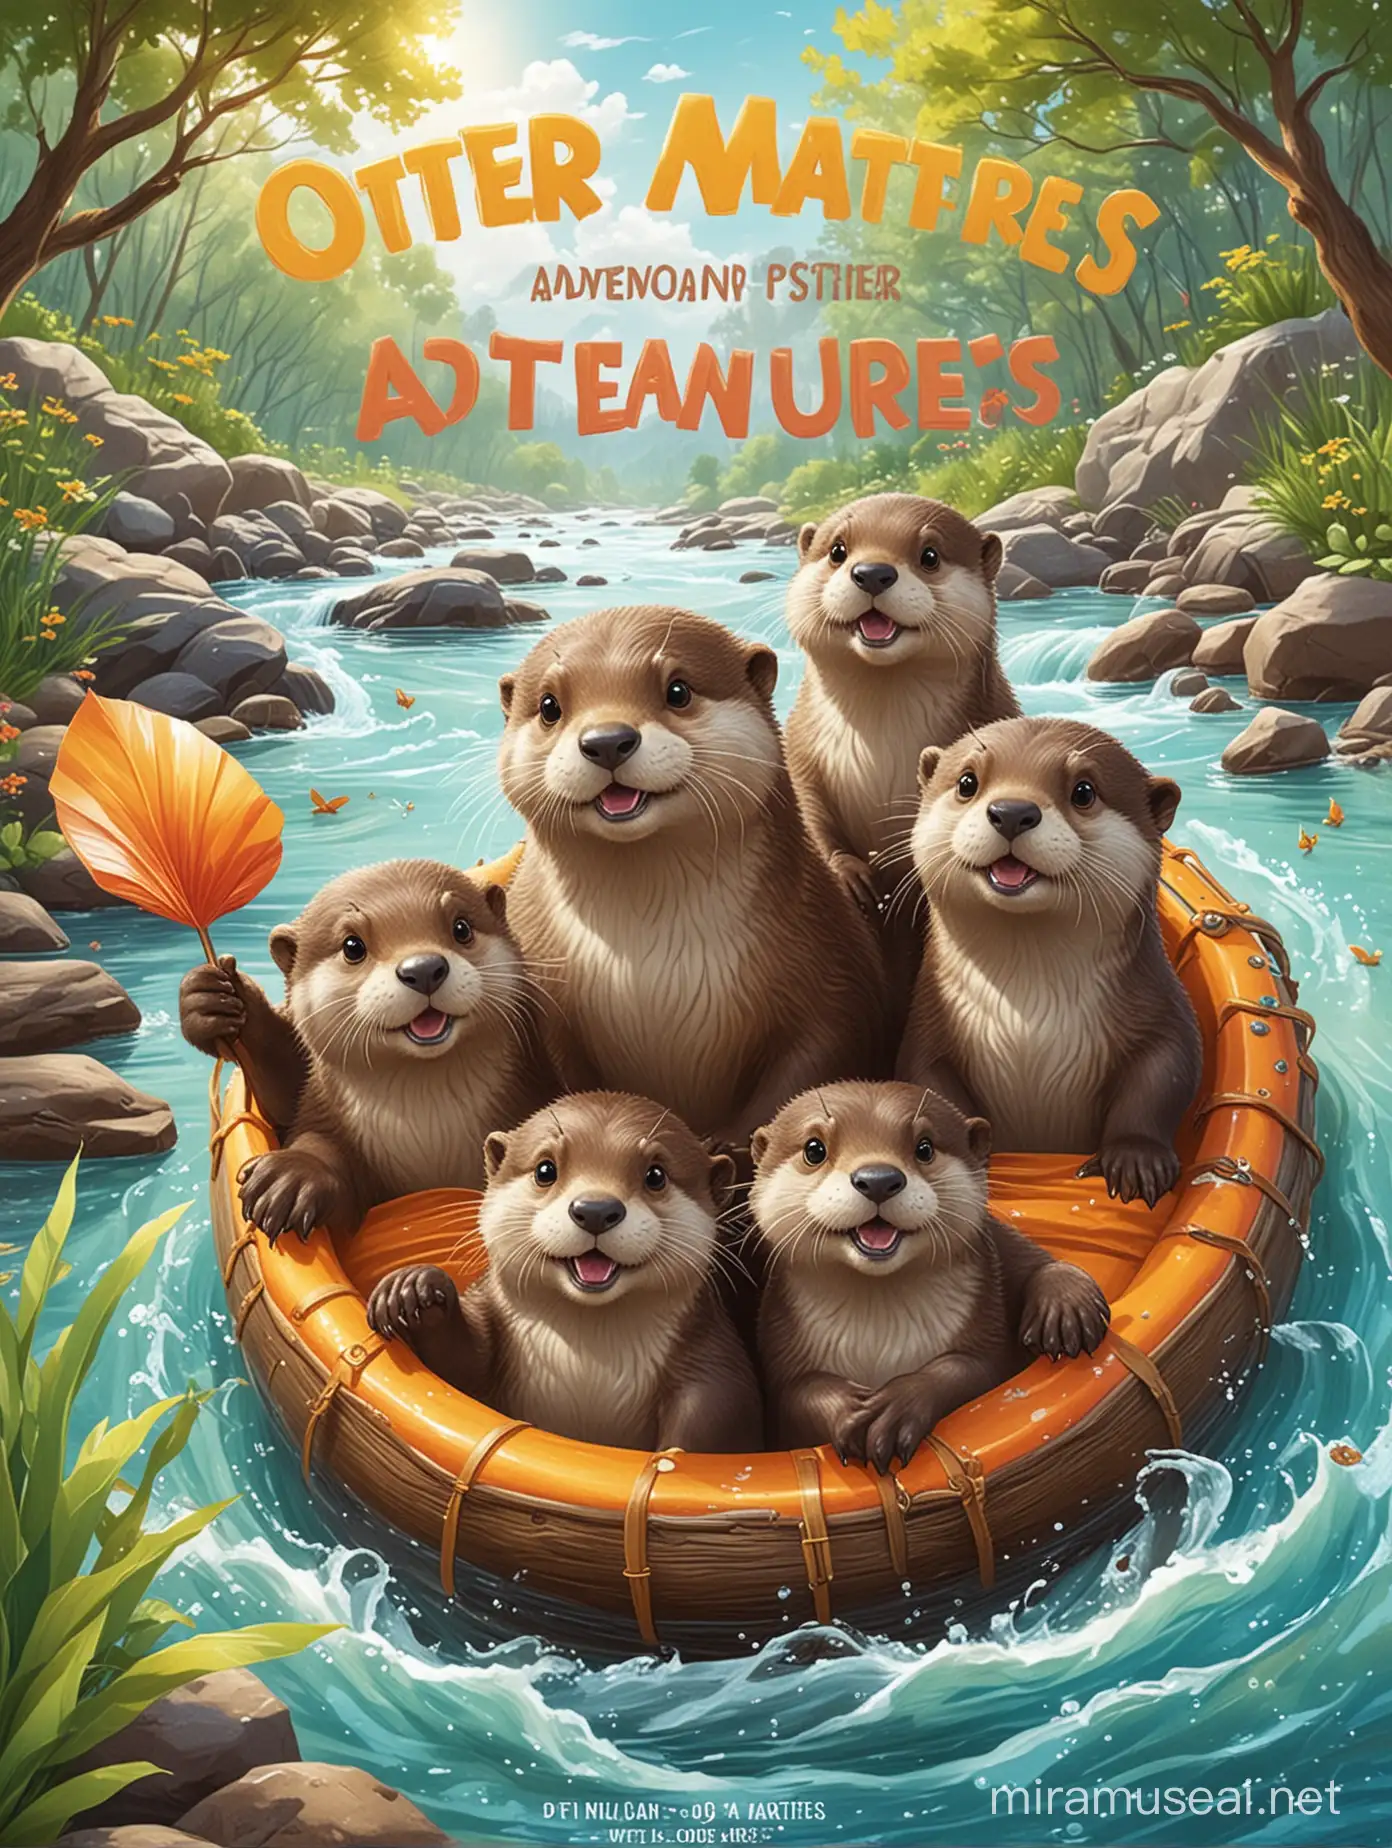 Whimsical Otter Adventures Playful Otters in a Vibrant River Setting